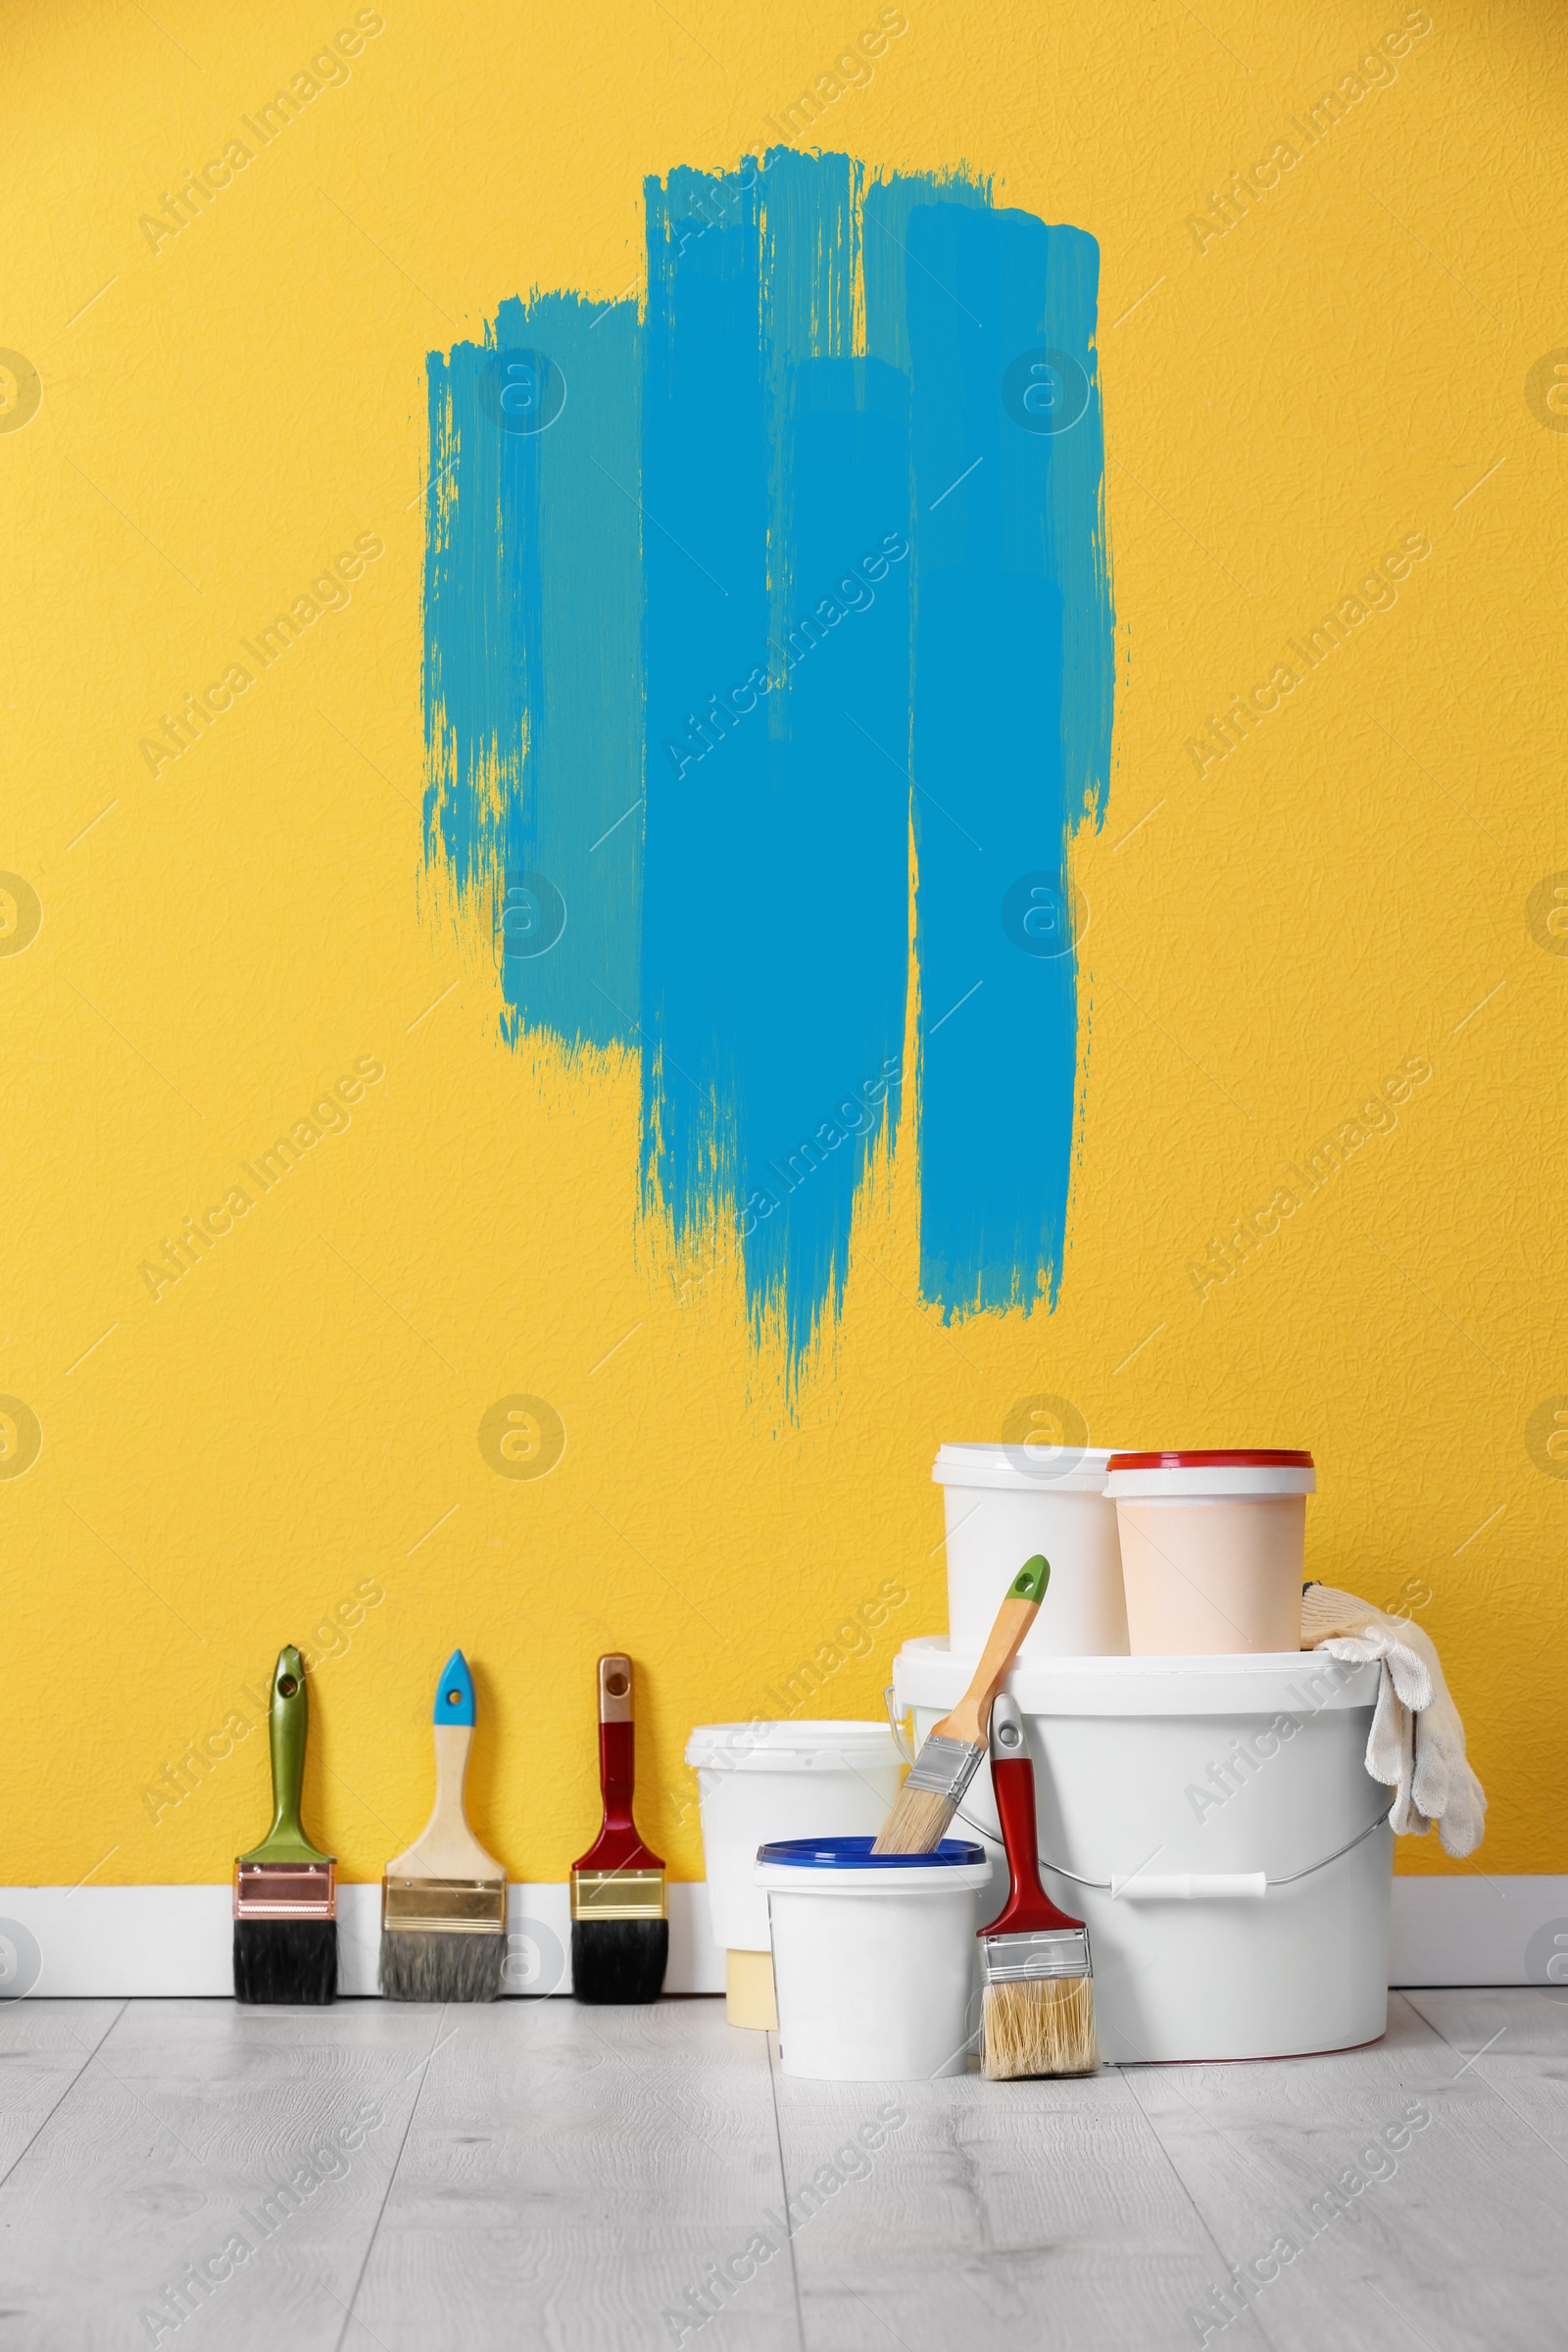 Image of Set with decorator's tools and paint on floor near yellow wall